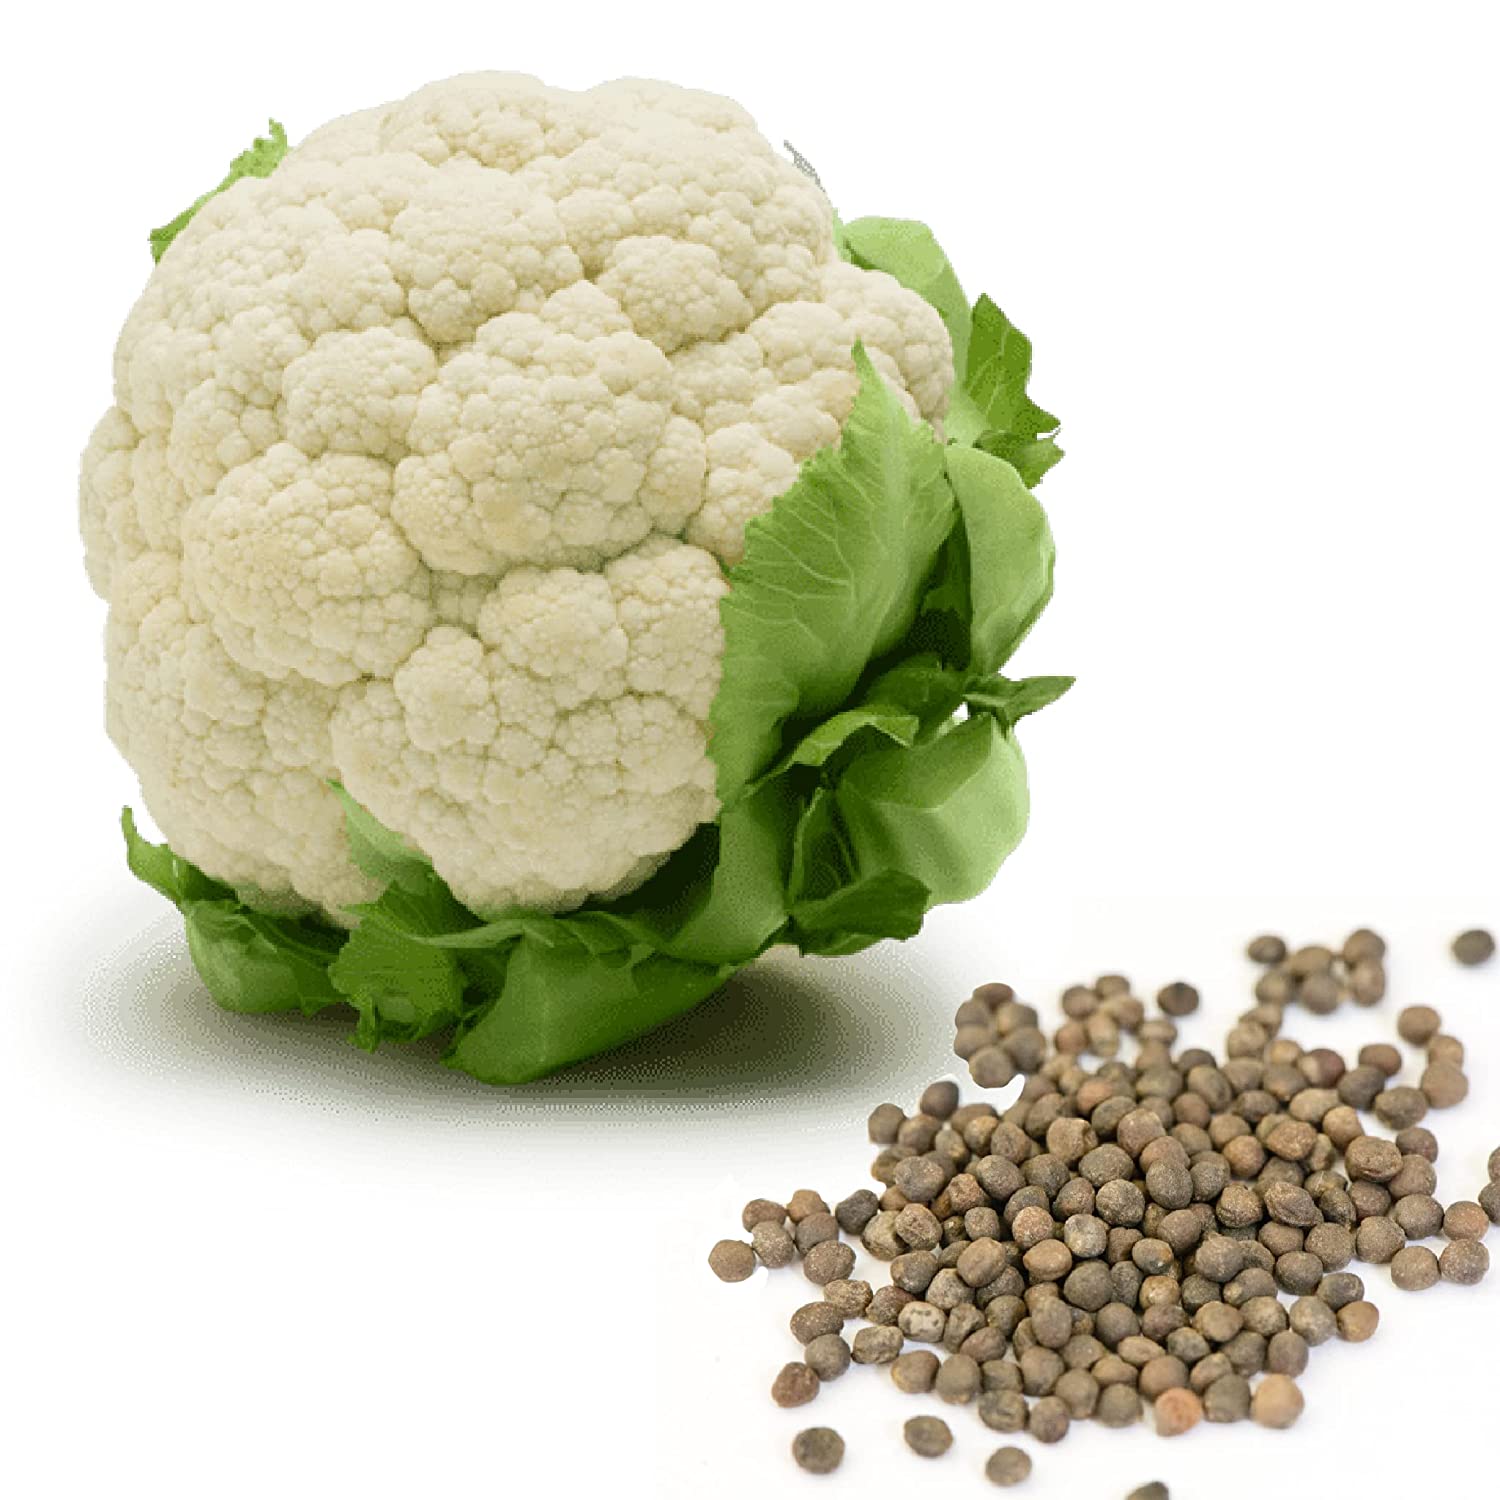 Shiviproducts Cauliflower, Cabbage and Turnips Seeds Combo